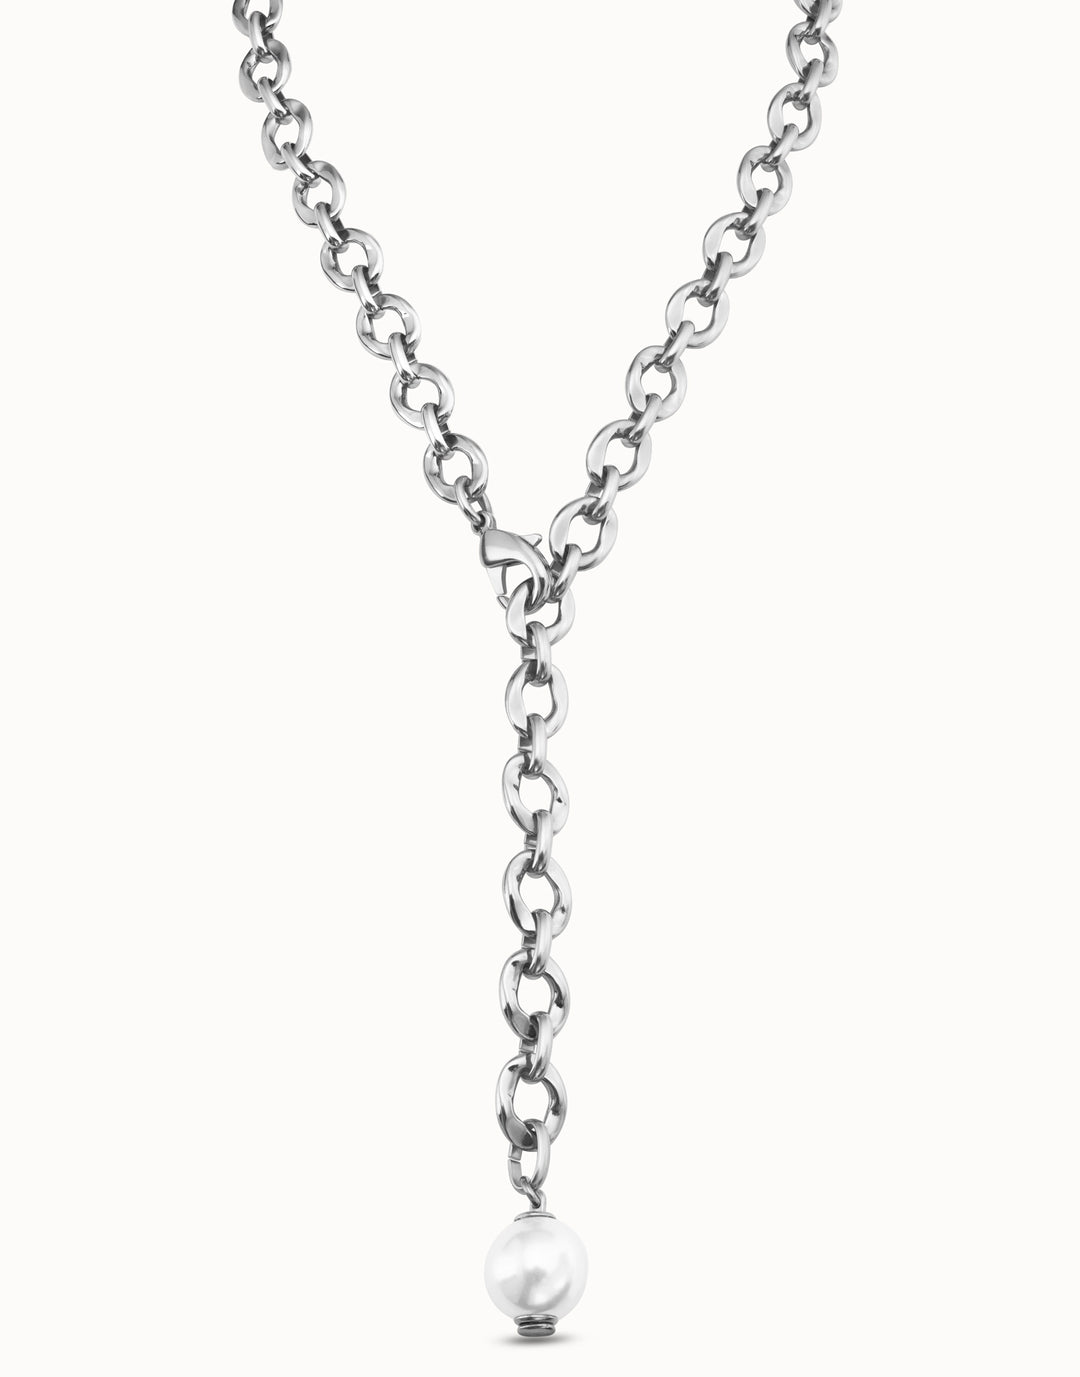 JOY OF LIVING NECKLACE-SILVER